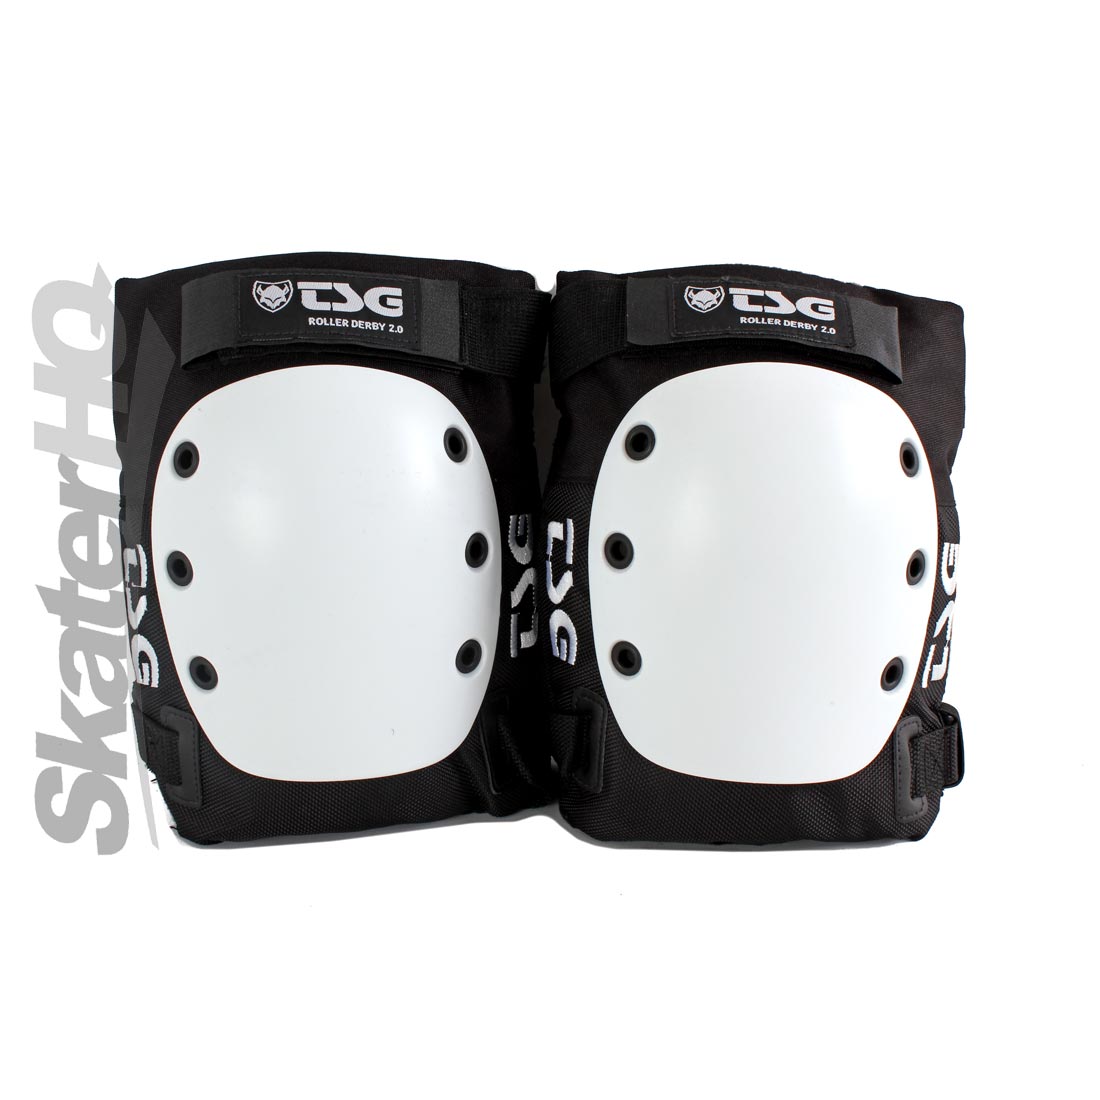 TSG Rollerderby Knee Pad 2.0 Black - XSmall Protective Gear